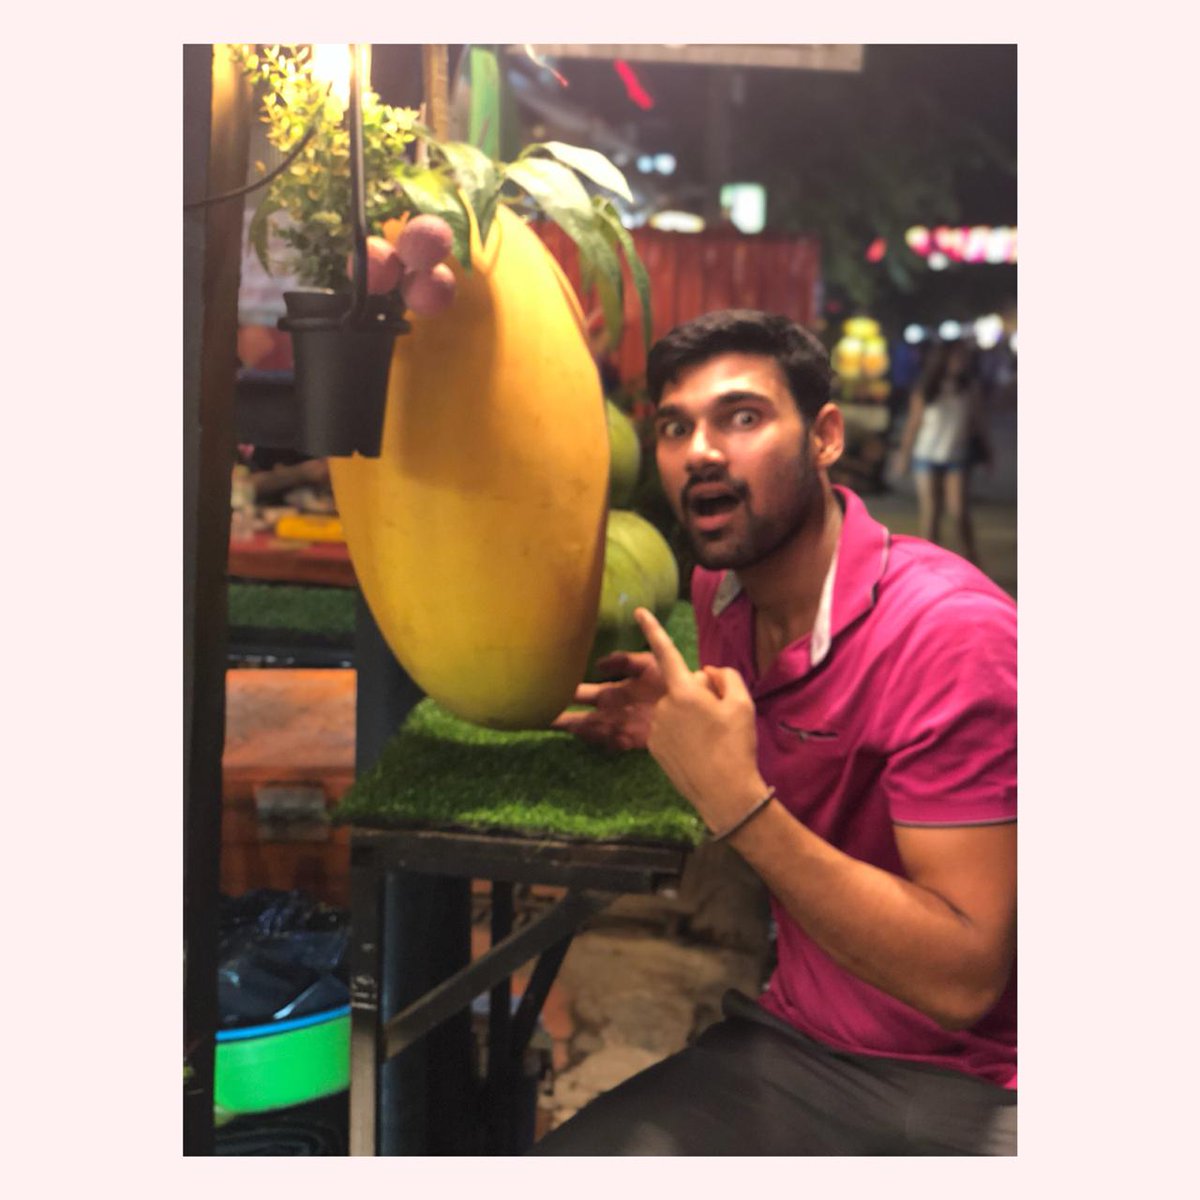 Taking “fruitarian” a bit too seriously ! #clearlyinfluenced #isthisforreal #mangood do you think I can eat the whole mango? #siemreap #pubstreetsiemreap #unusualthings oh and most importantly, 📸 my very talented costar @MsKajalAggarwal